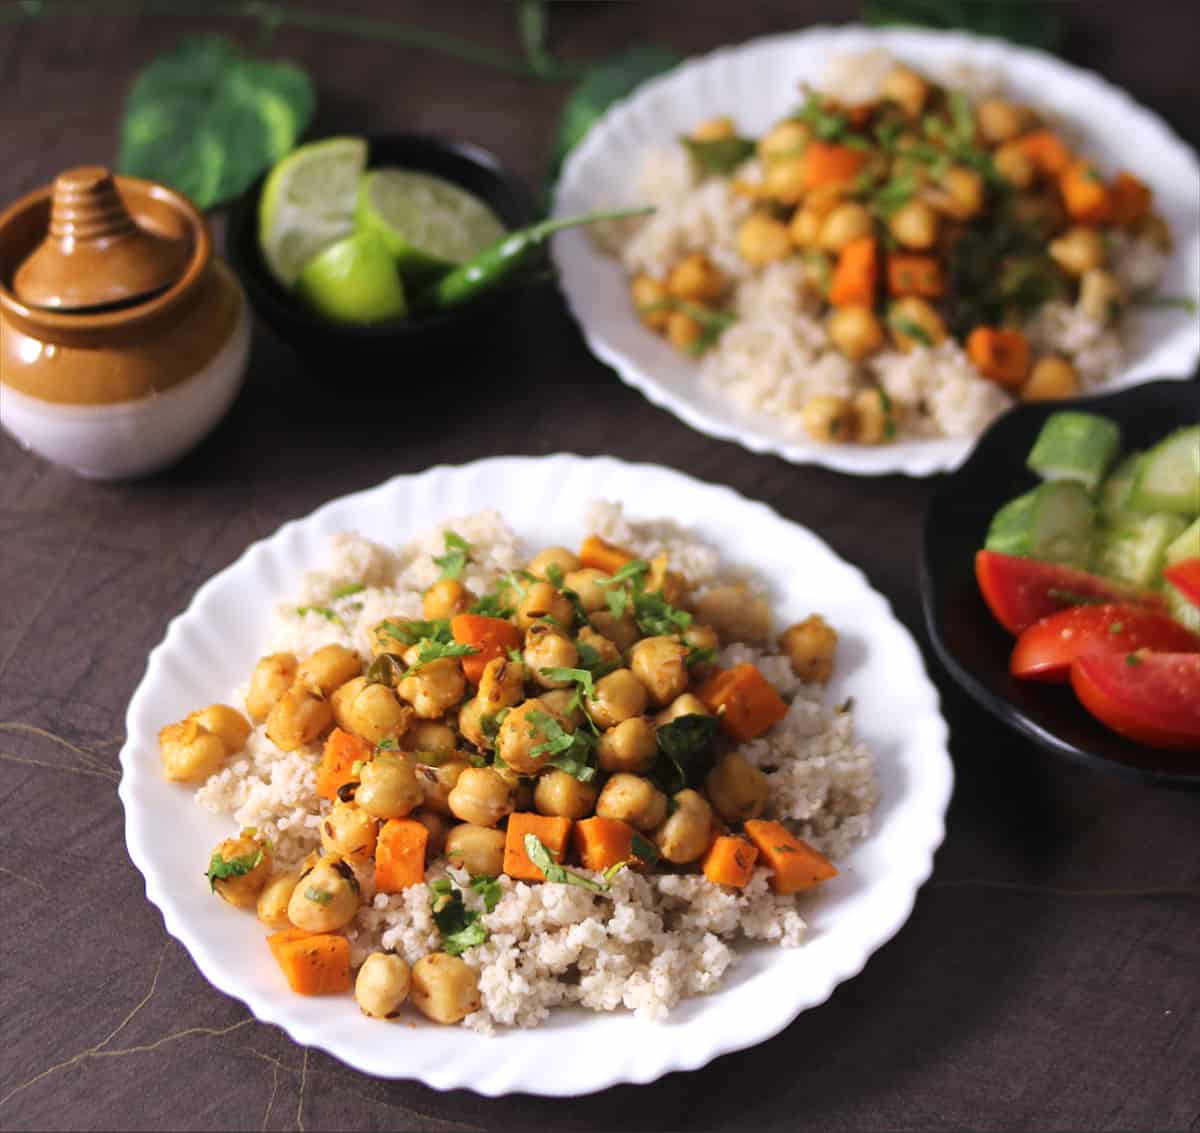 healthy weight loss vegetarian meal with millet and chickpeas